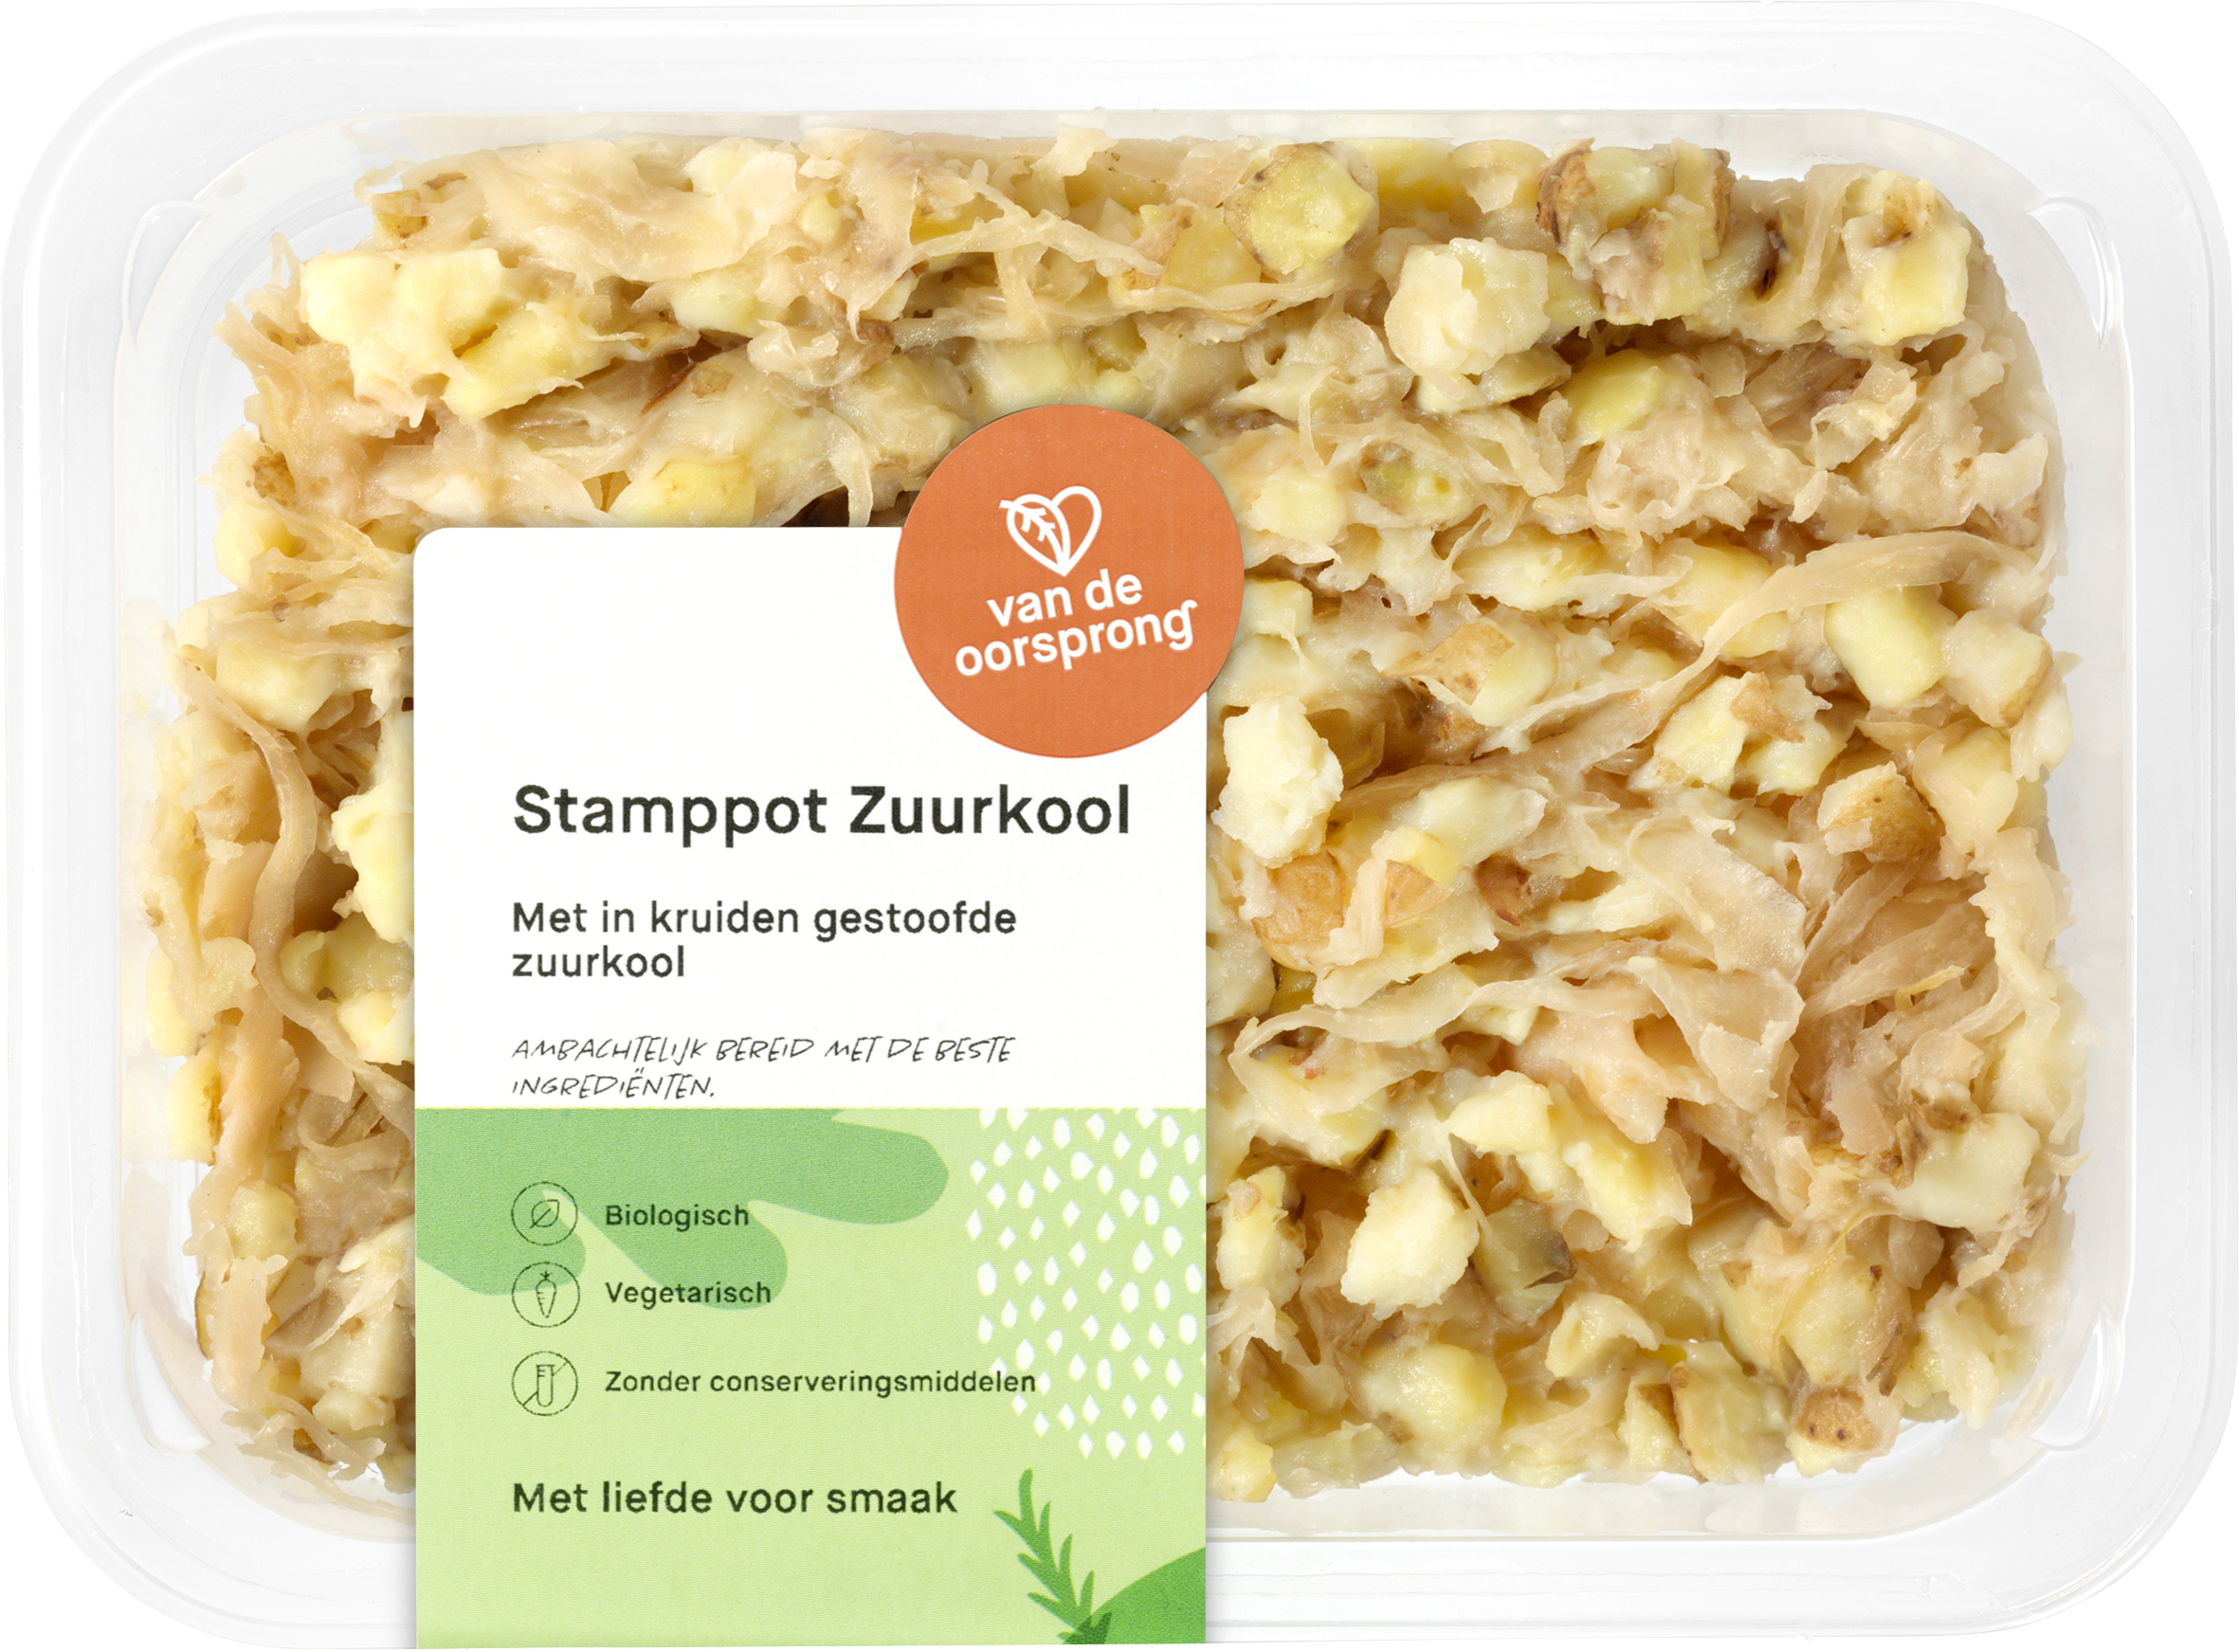 Stamppot zuurkool